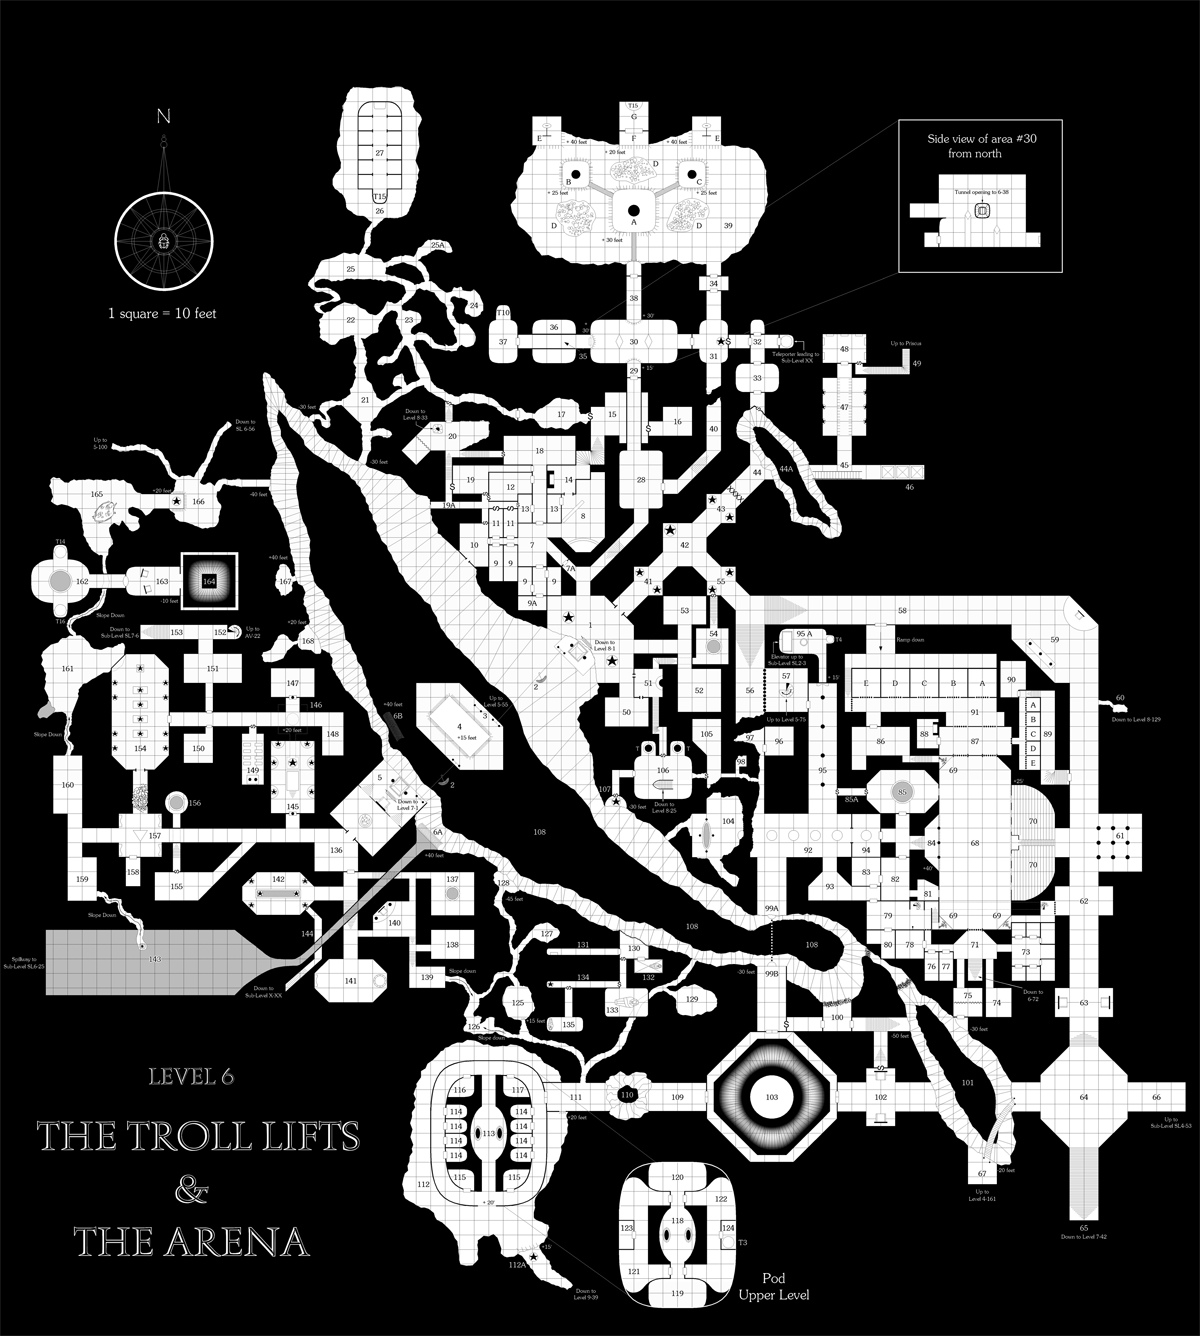 Level 6 - The Troll Lifts & The Arena for blog.png